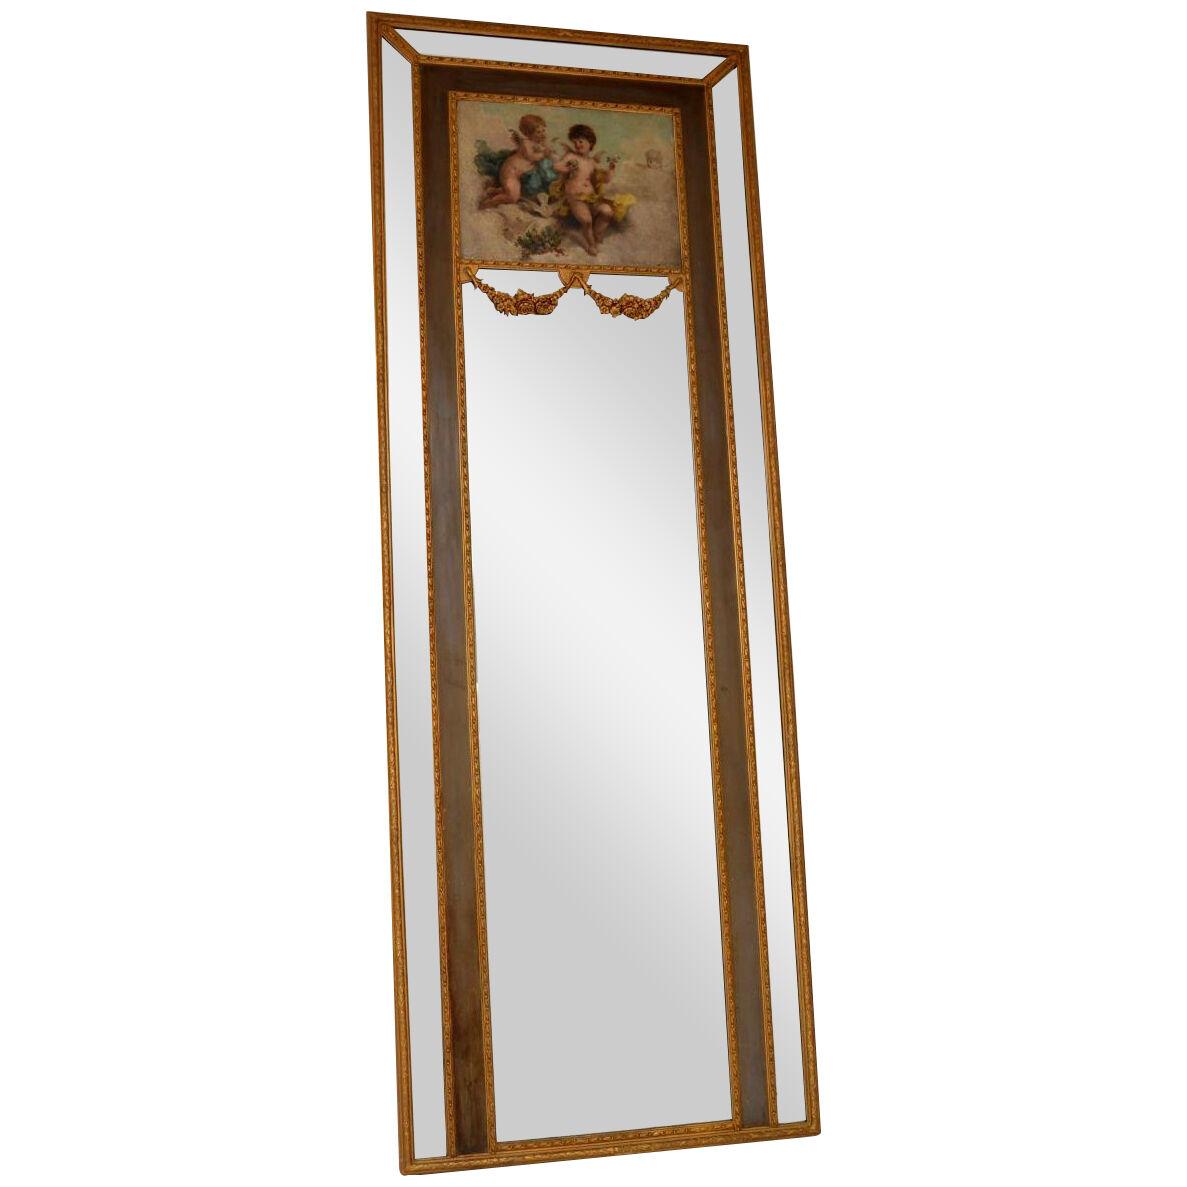 Very Tall Antique Gilt Wood Mirror with Oil Painting